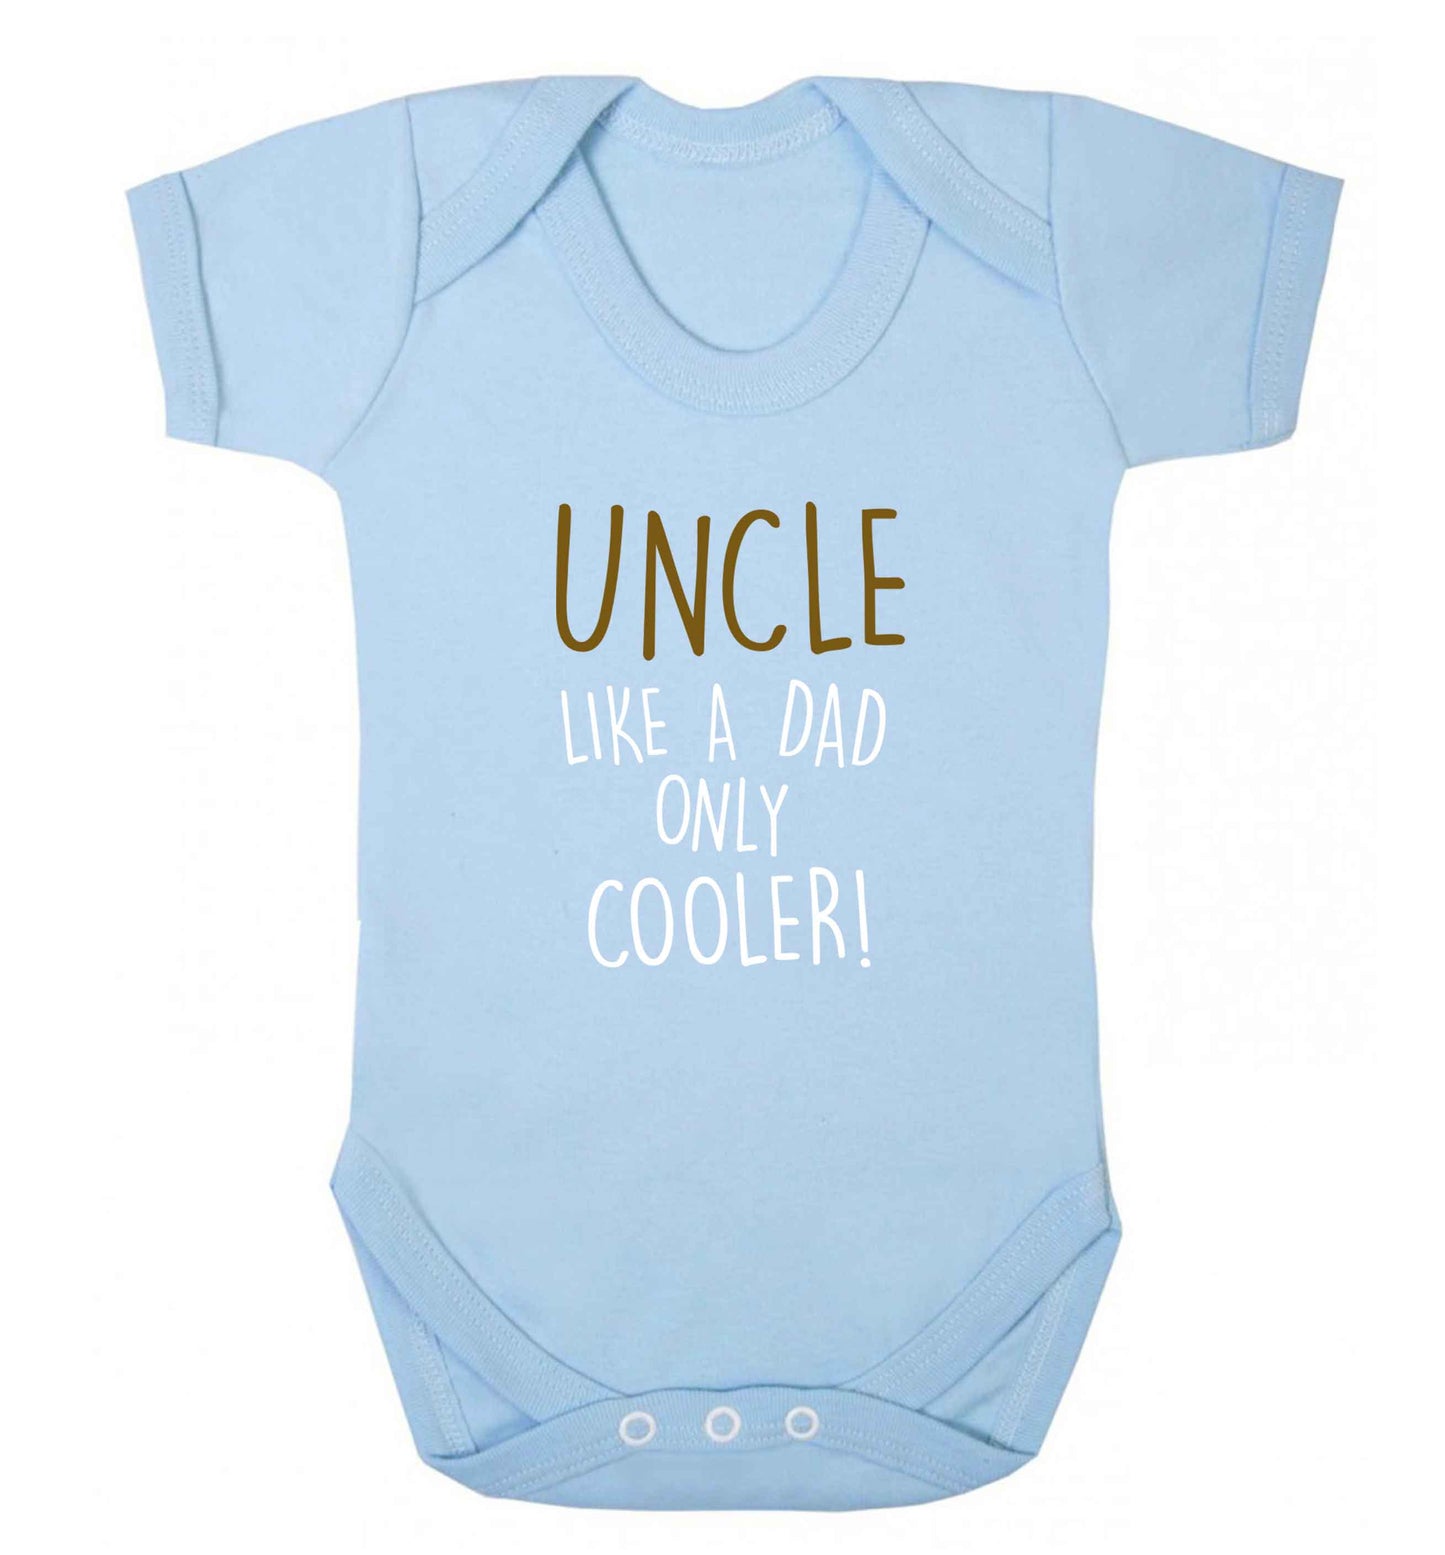 Uncle like a dad only cooler baby vest pale blue 18-24 months